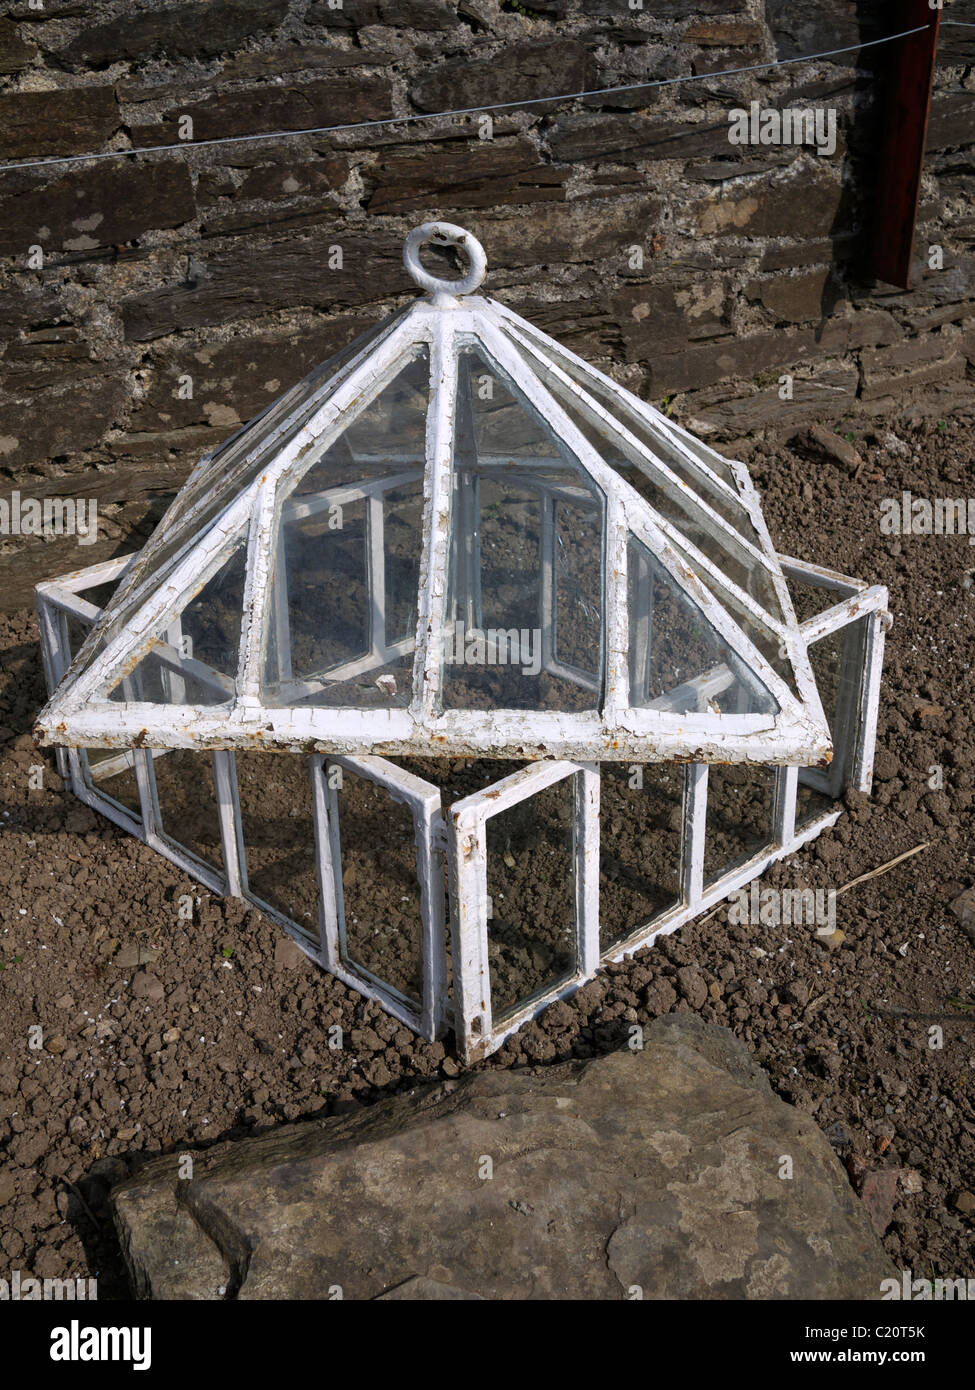 Small cold frame or cloche used to protect plants Lost Garden of Heligan  St Austell Cornwall UK Stock Photo